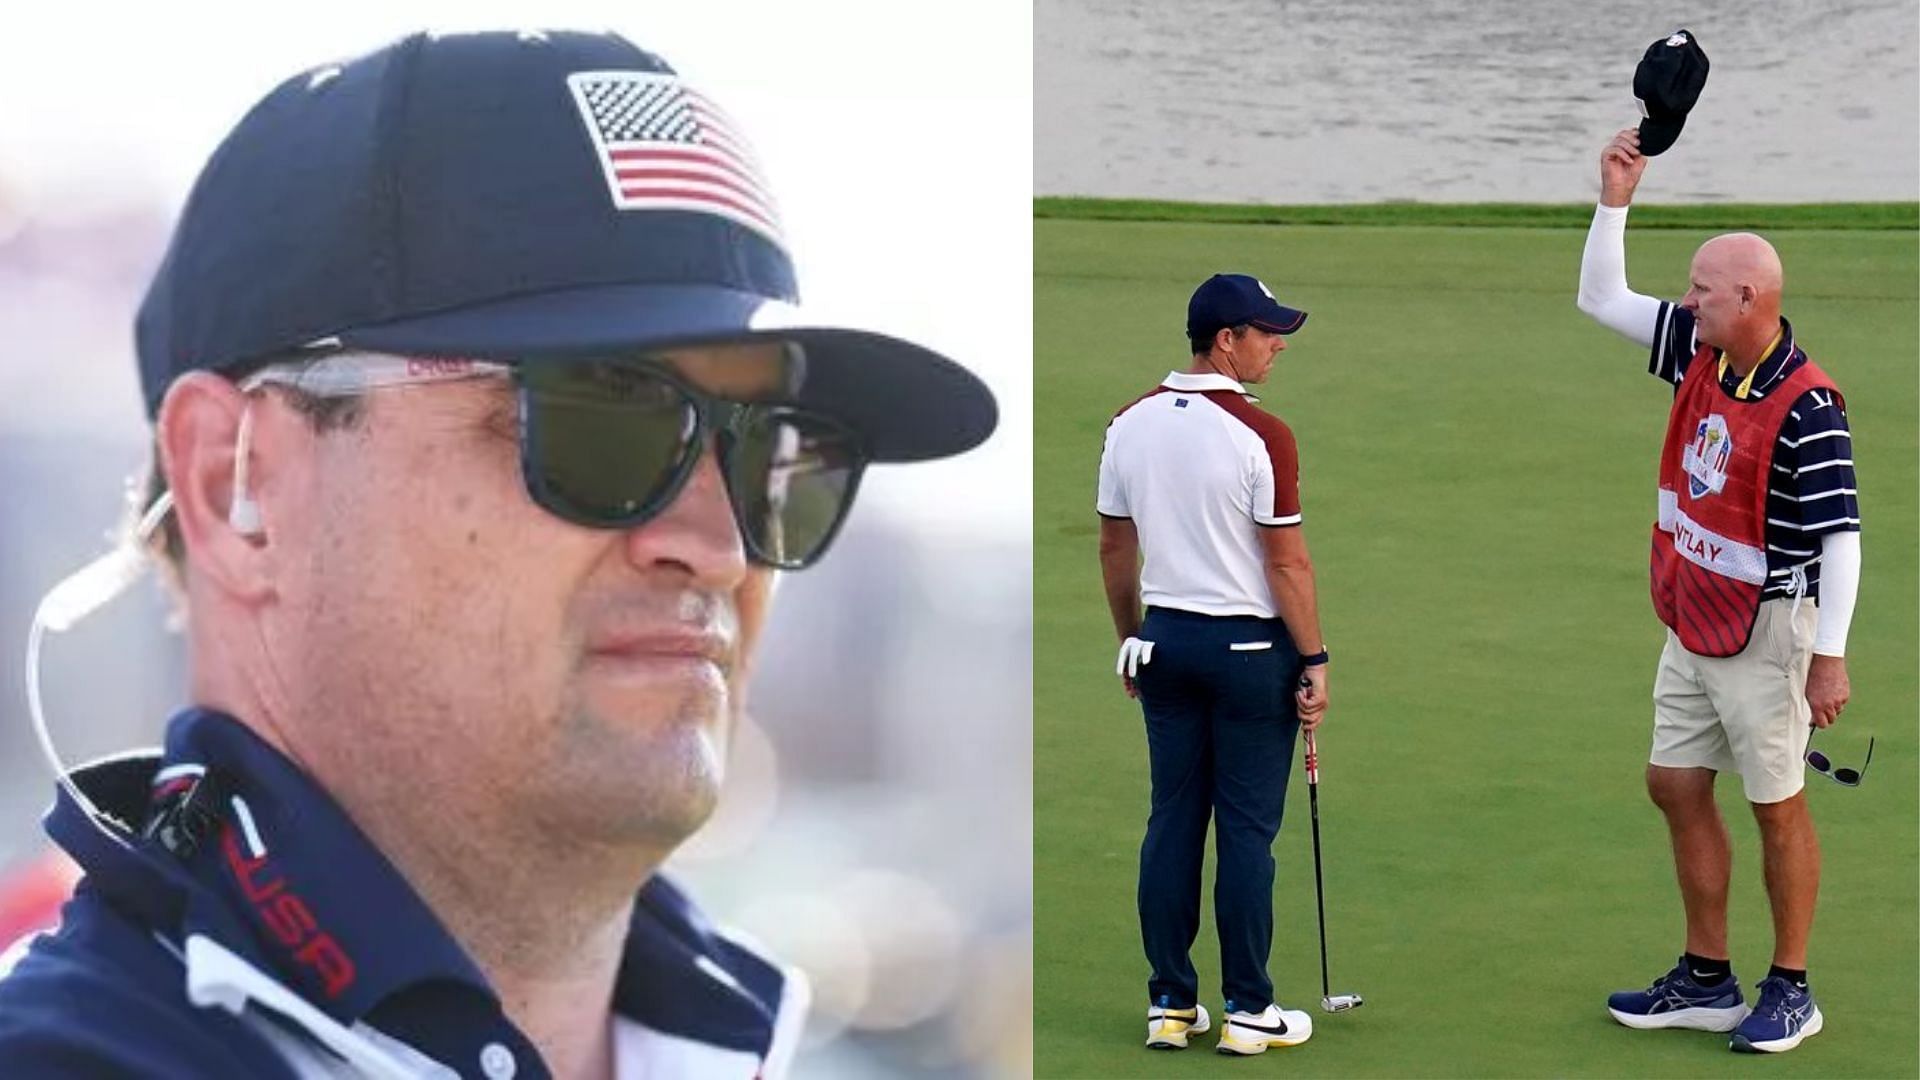 Zach Johnson has instructed Joe LaCava not to speak to the media - Reports (Images via Getty)